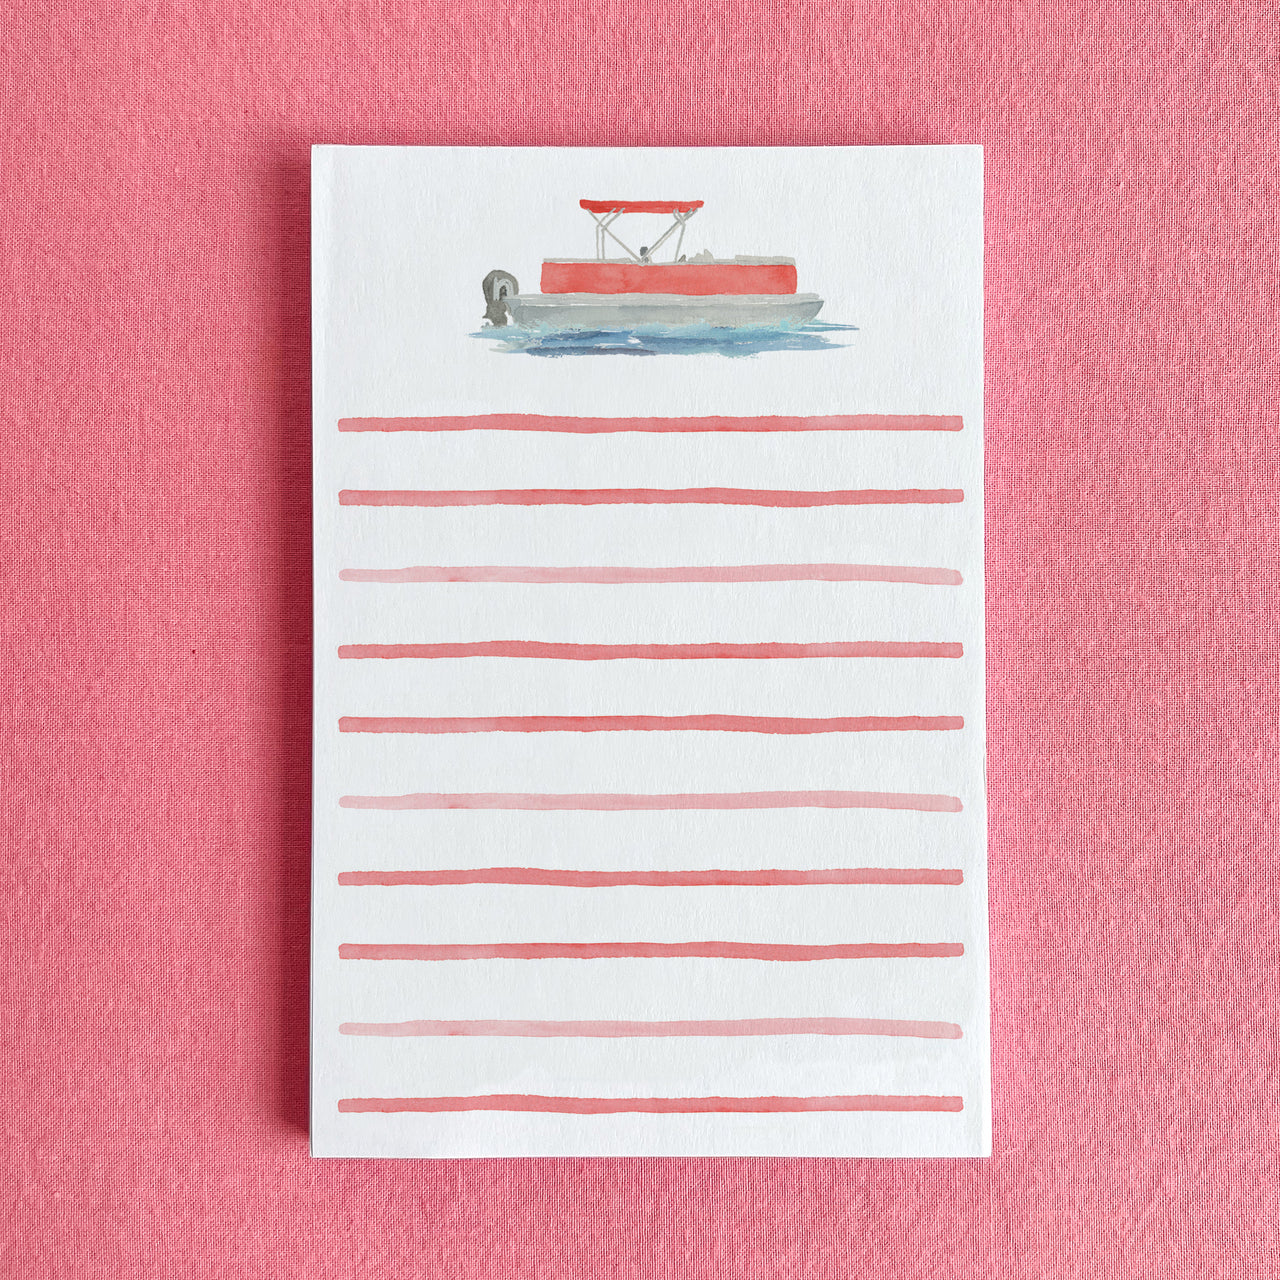 Pontoon Boat Notepad by Gert & Co